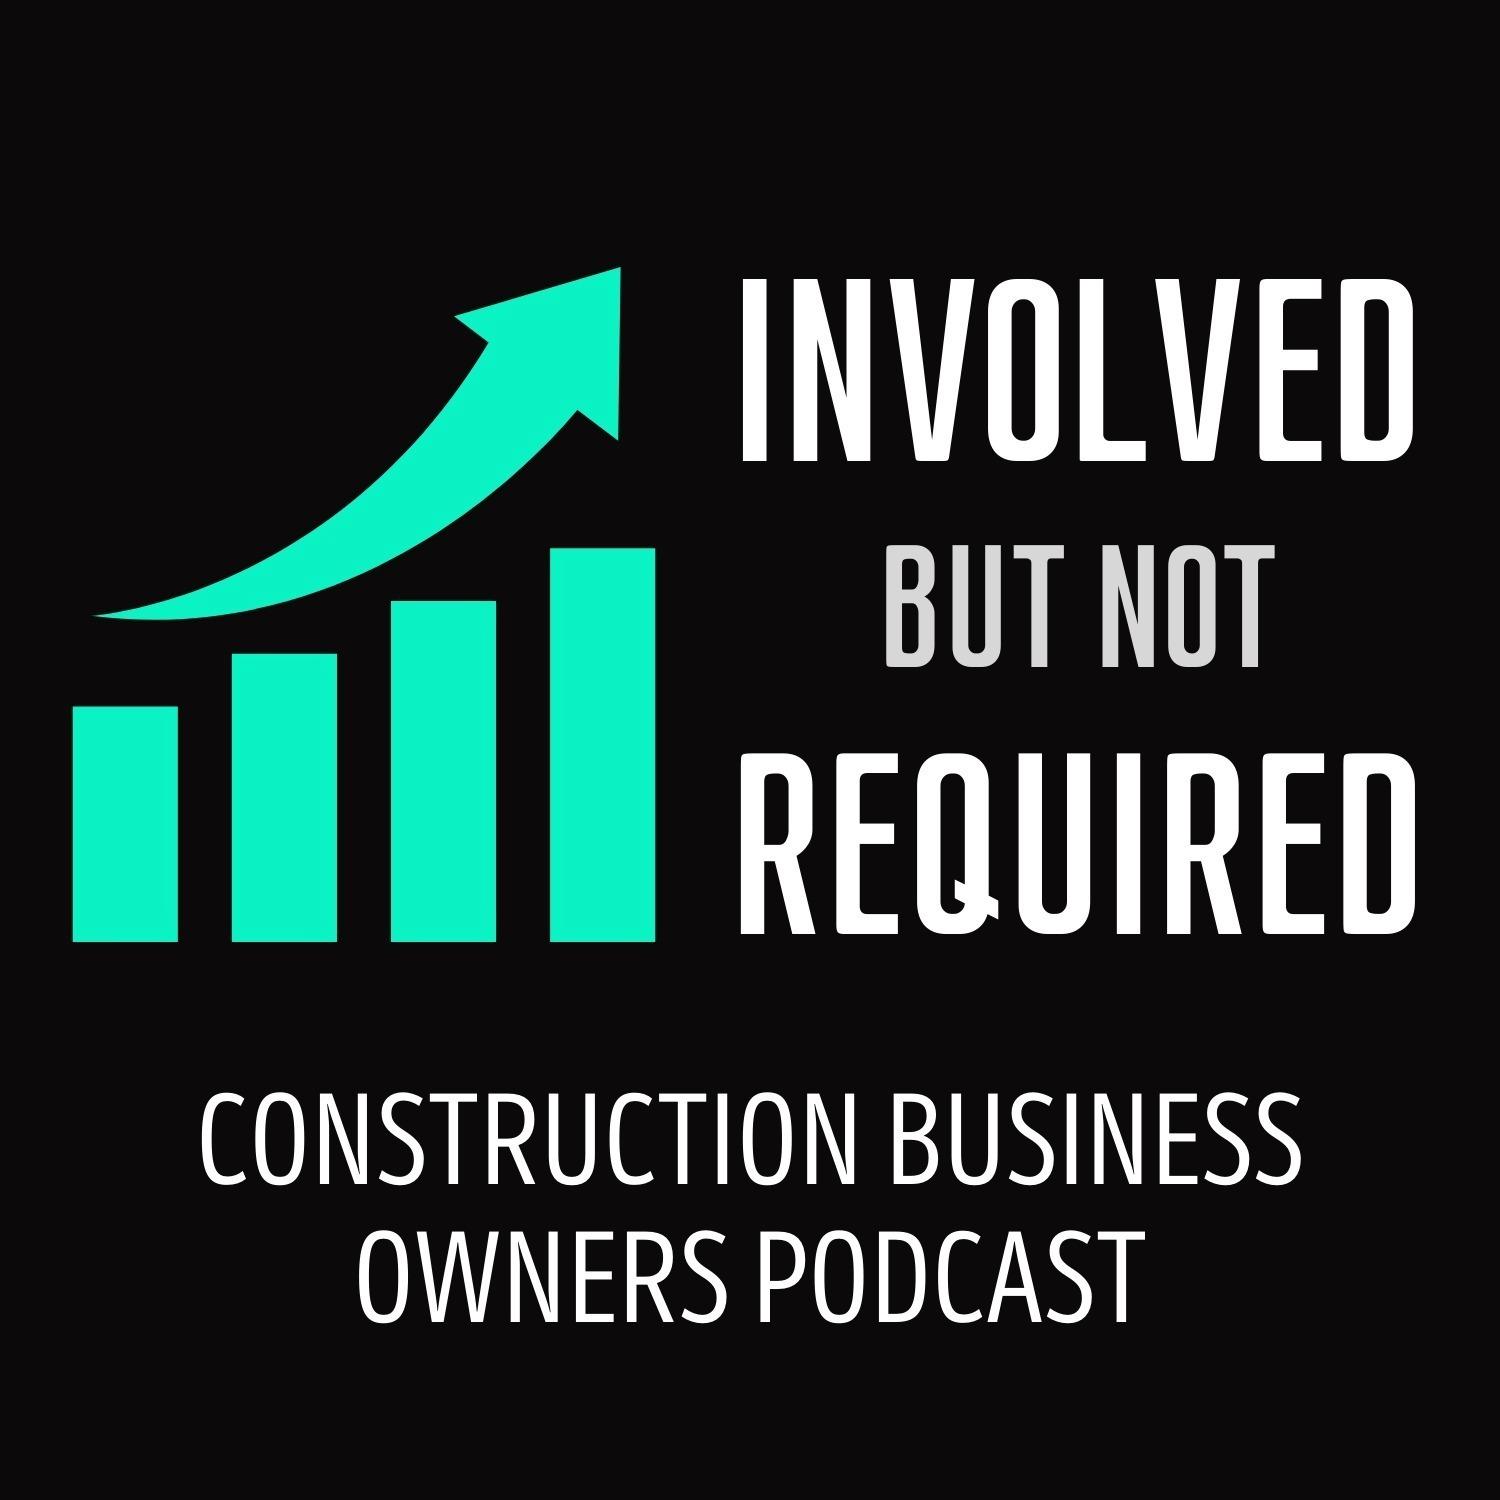 INVOLVED BUT NOT REQUIRED - Construction Business Owners Podcast